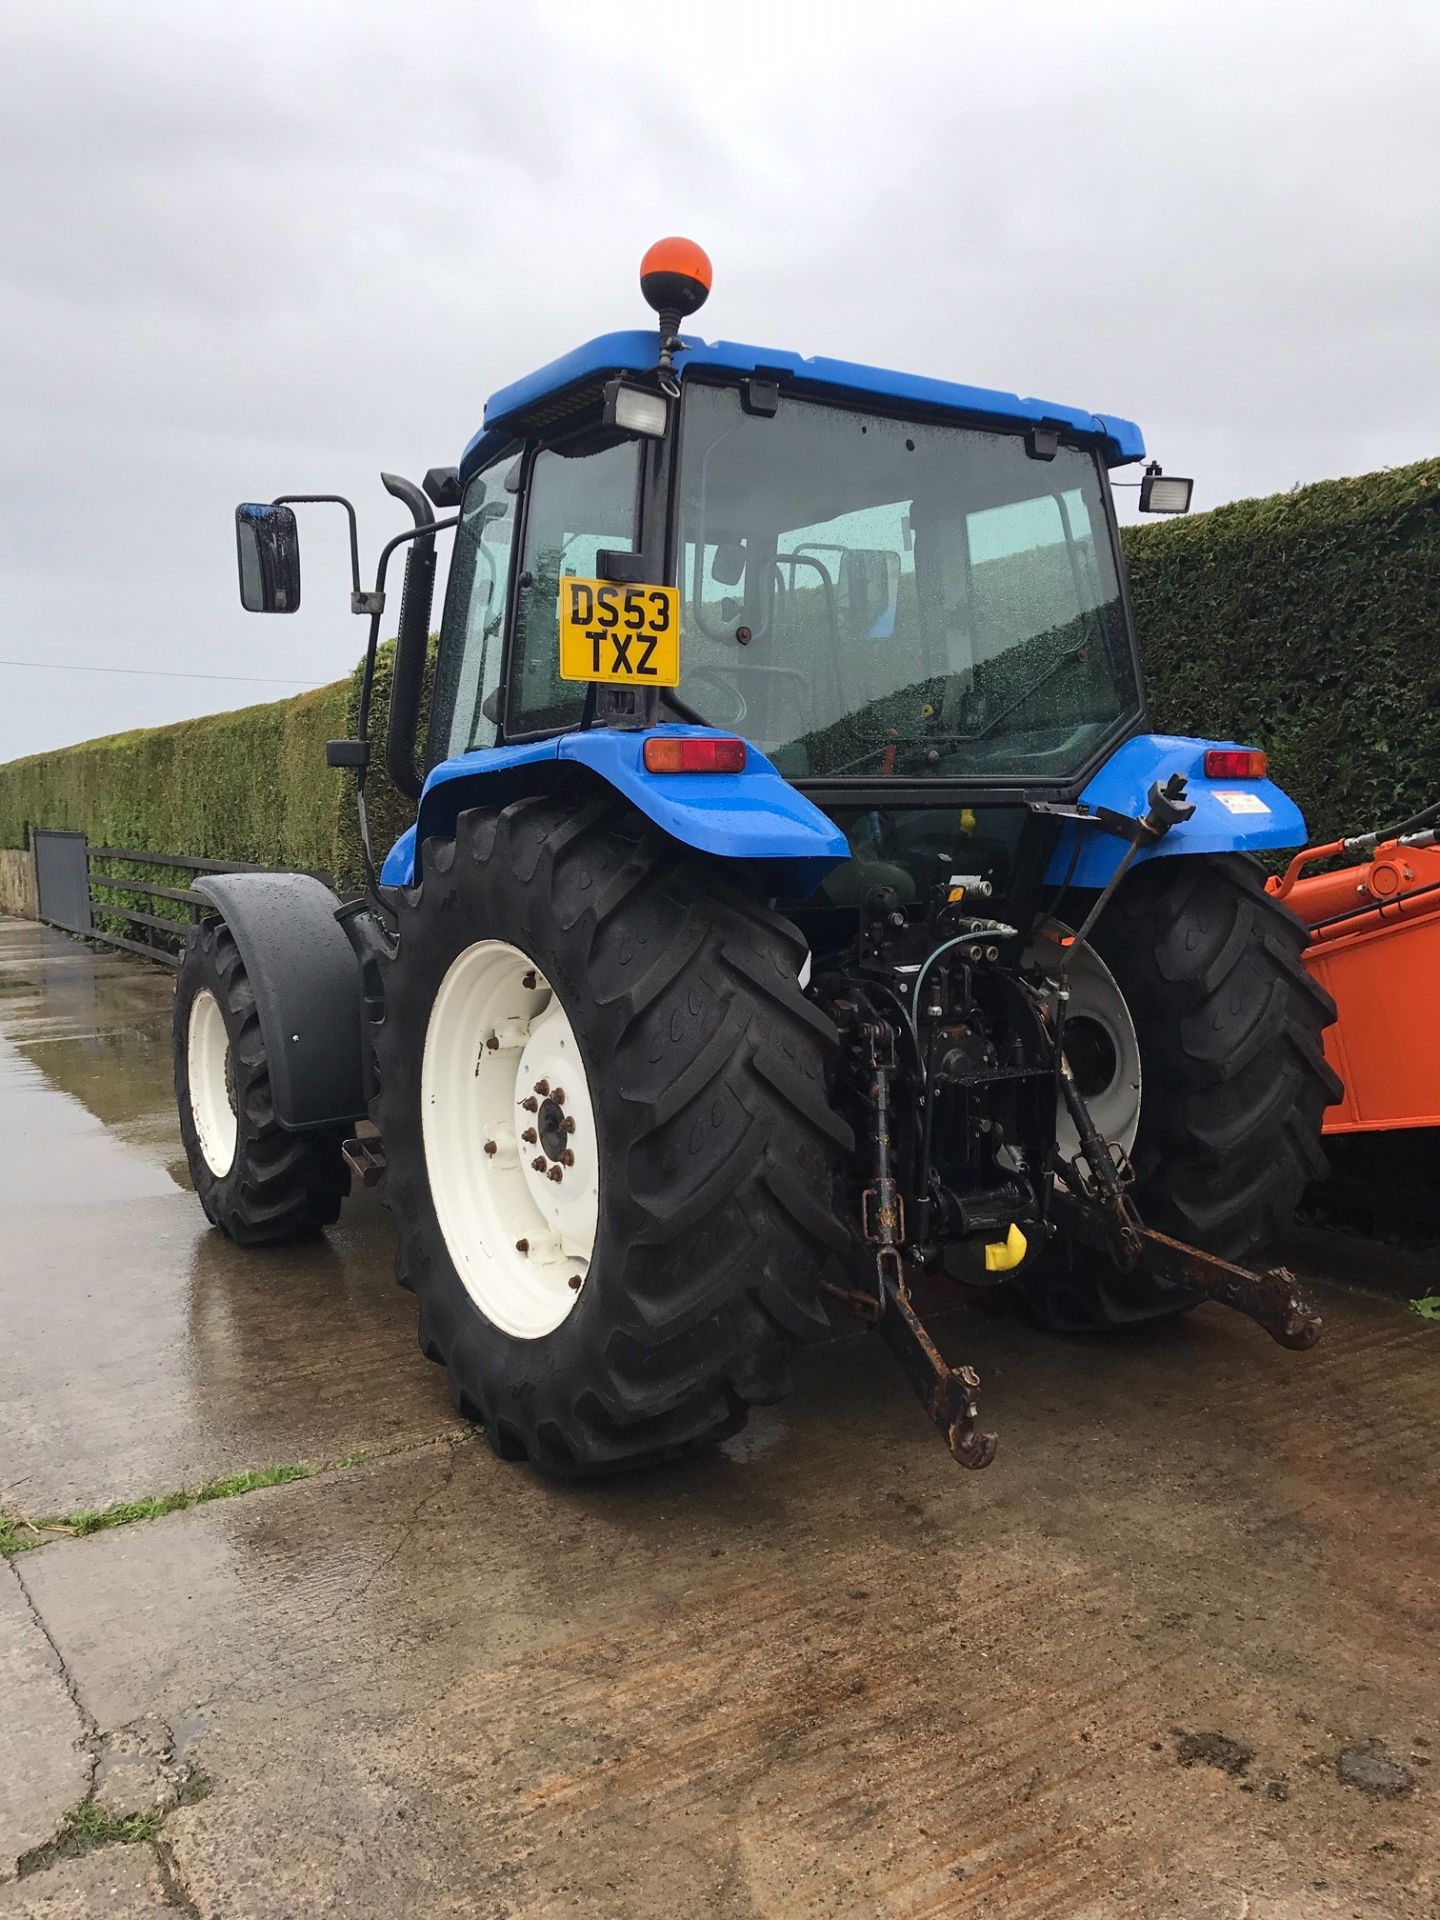 2003 NEW HOLLAND TL 90 4WD TRACTOR (REG NUMBER - DS53 TXZ) 7100 HOURS EXCELLENT CONDITION - Image 2 of 2